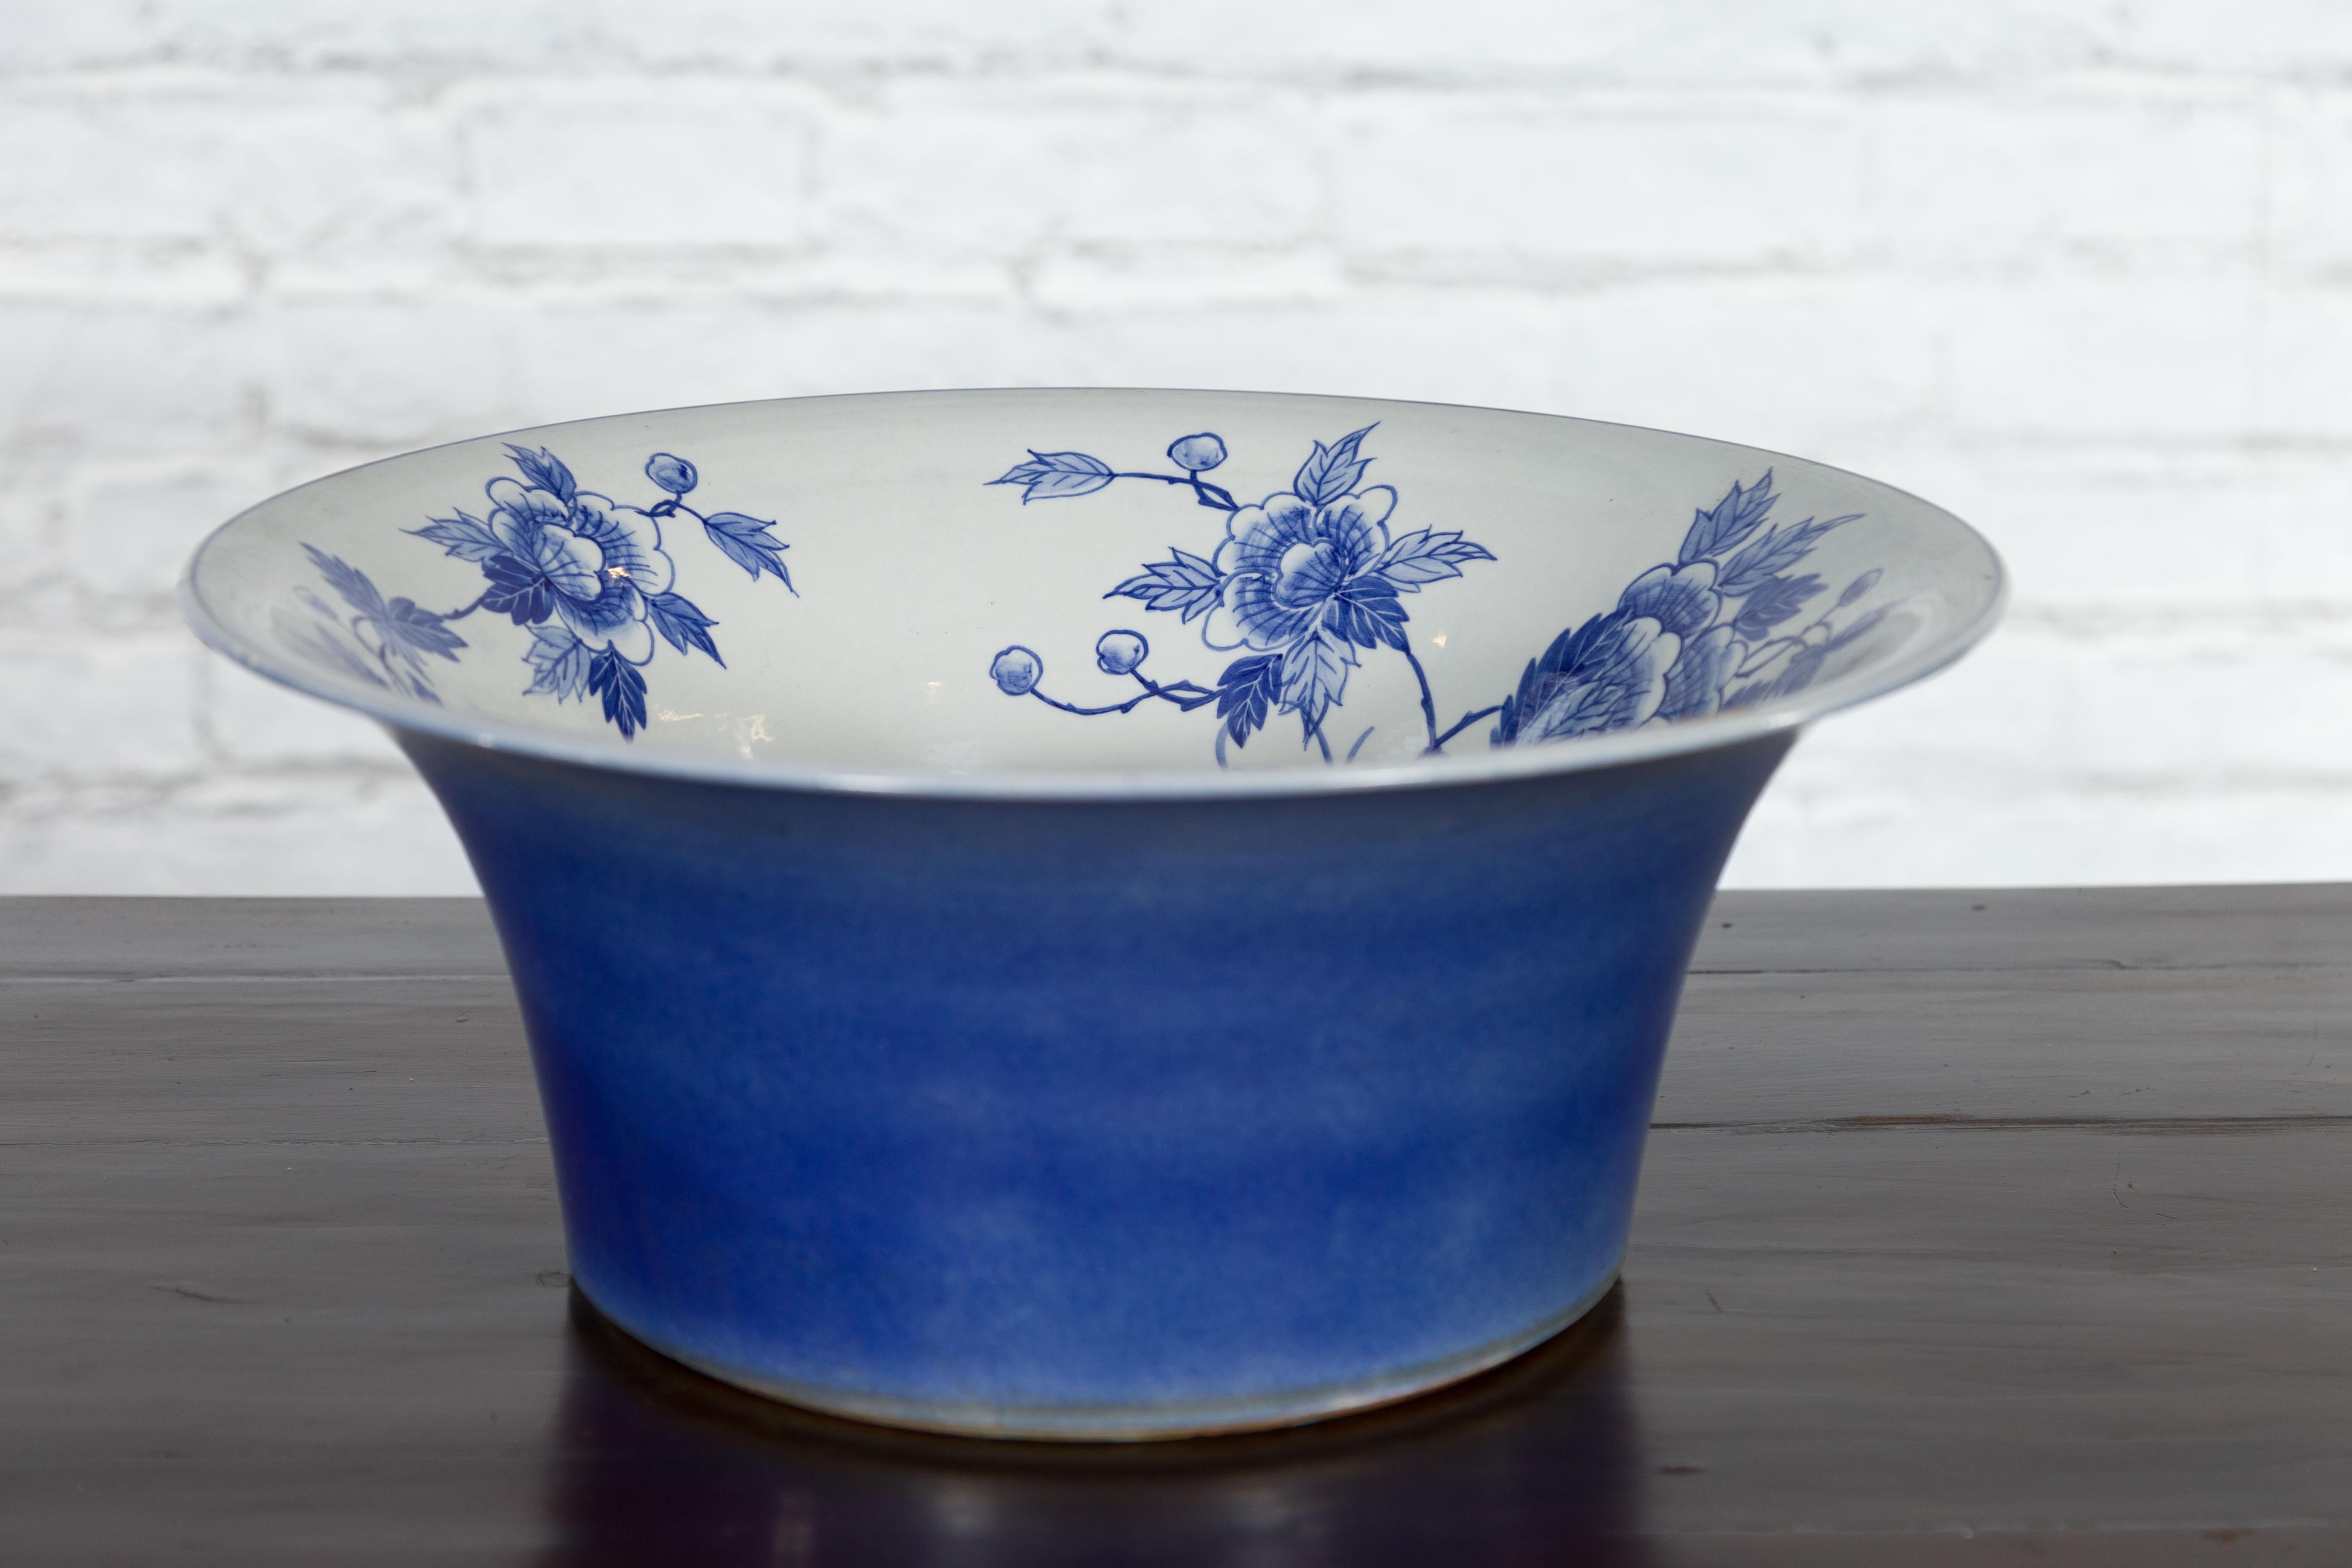 Hand-Painted Chinese Blue and White Porcelain Wash Basin with Floral Motifs and Cobalt Blue For Sale